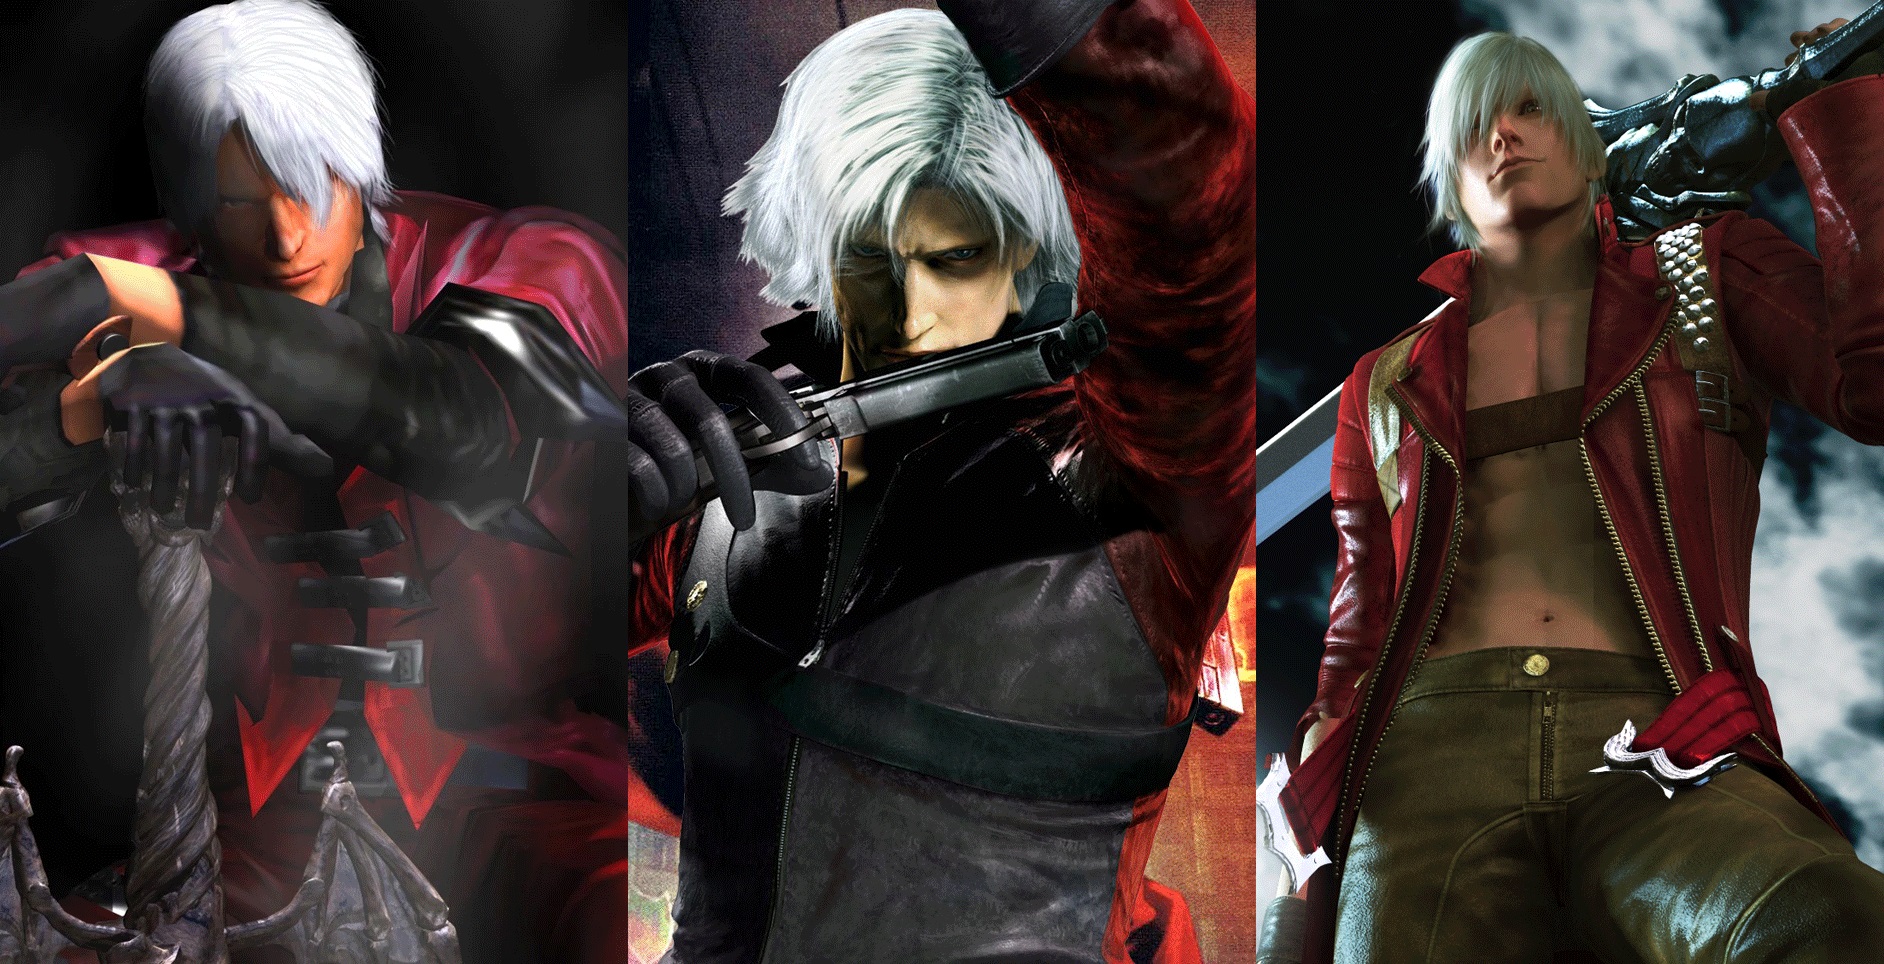 Devil may cry collection русификатор. DMC ps3. DMC 3 ps3. Devil May Cry 1. DMC 4 ps3.